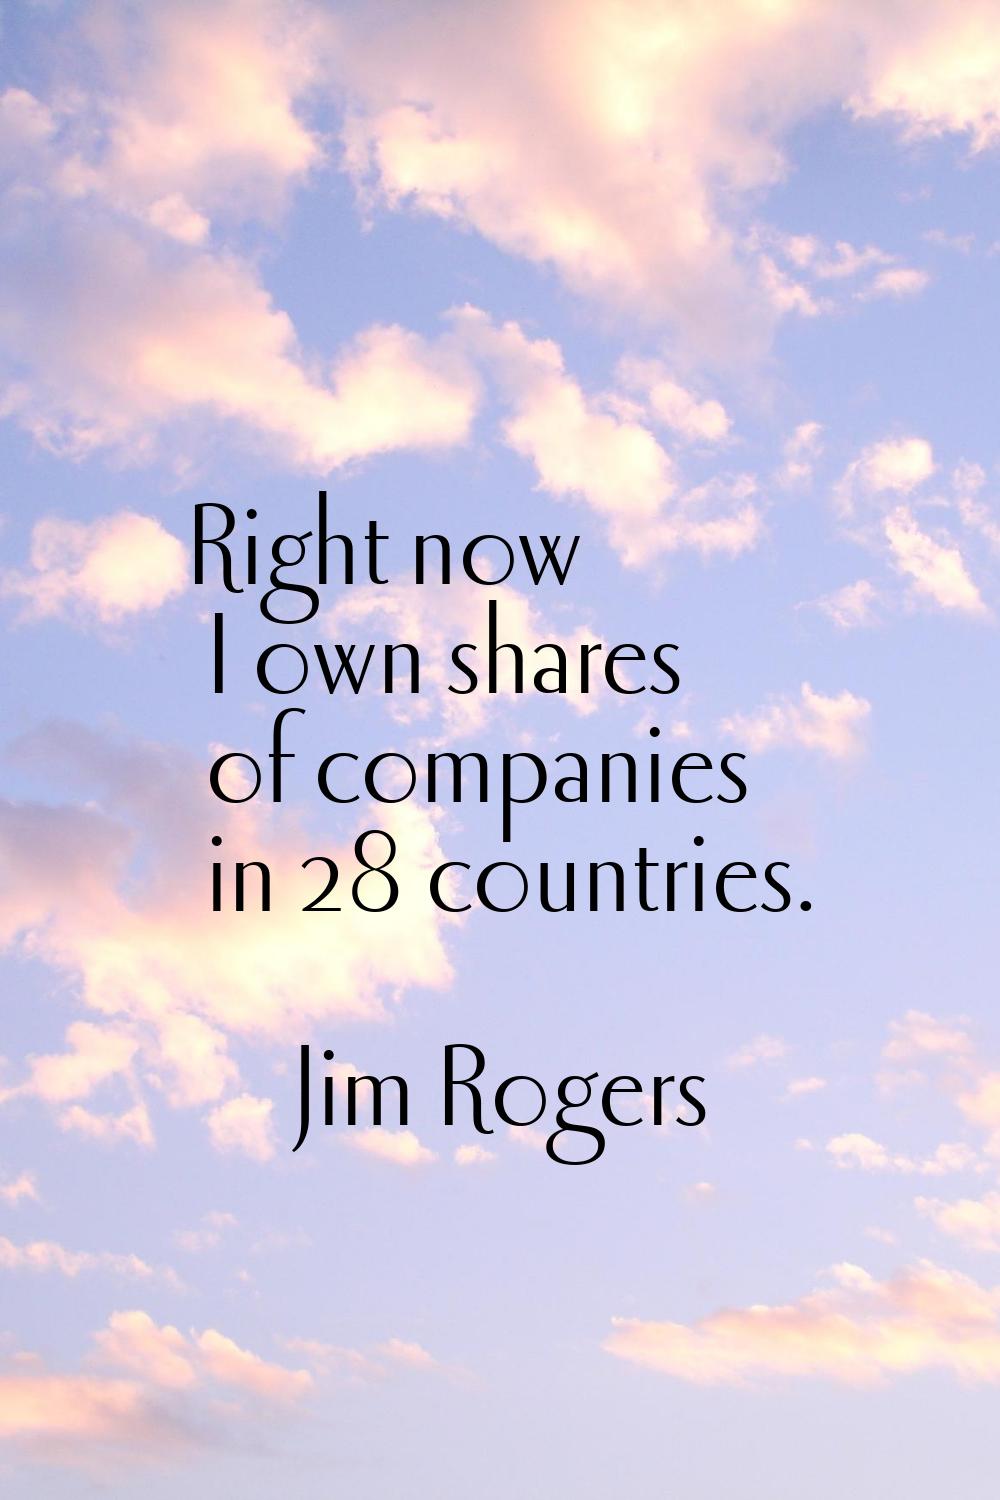 Right now I own shares of companies in 28 countries.